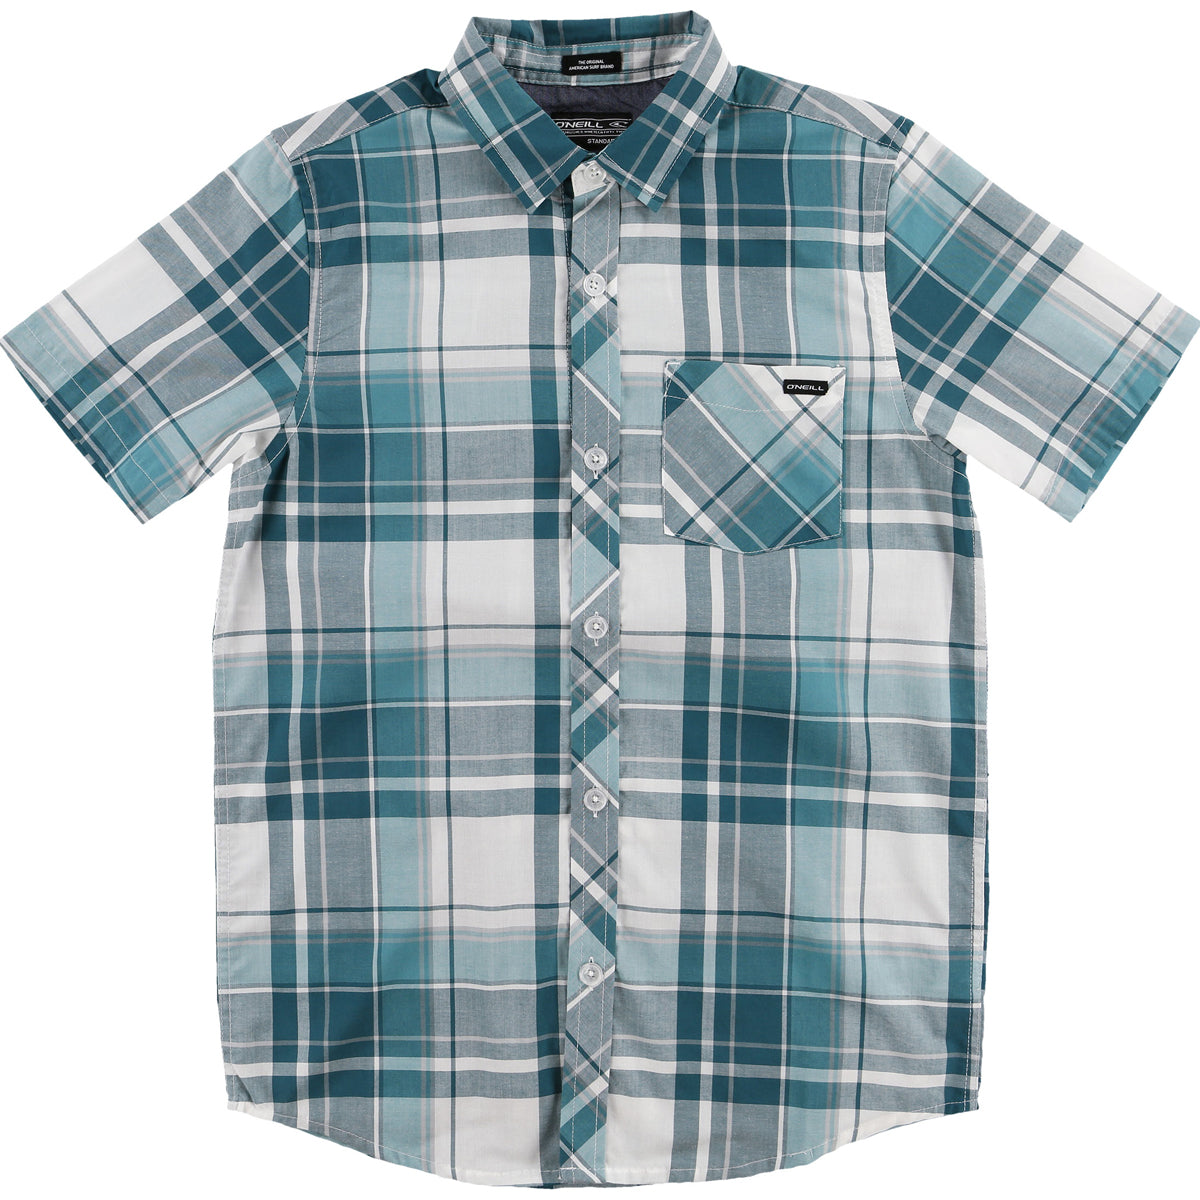 O'Neill Plaid Youth Boys Button Up Short-Sleeve Shirts - Ink